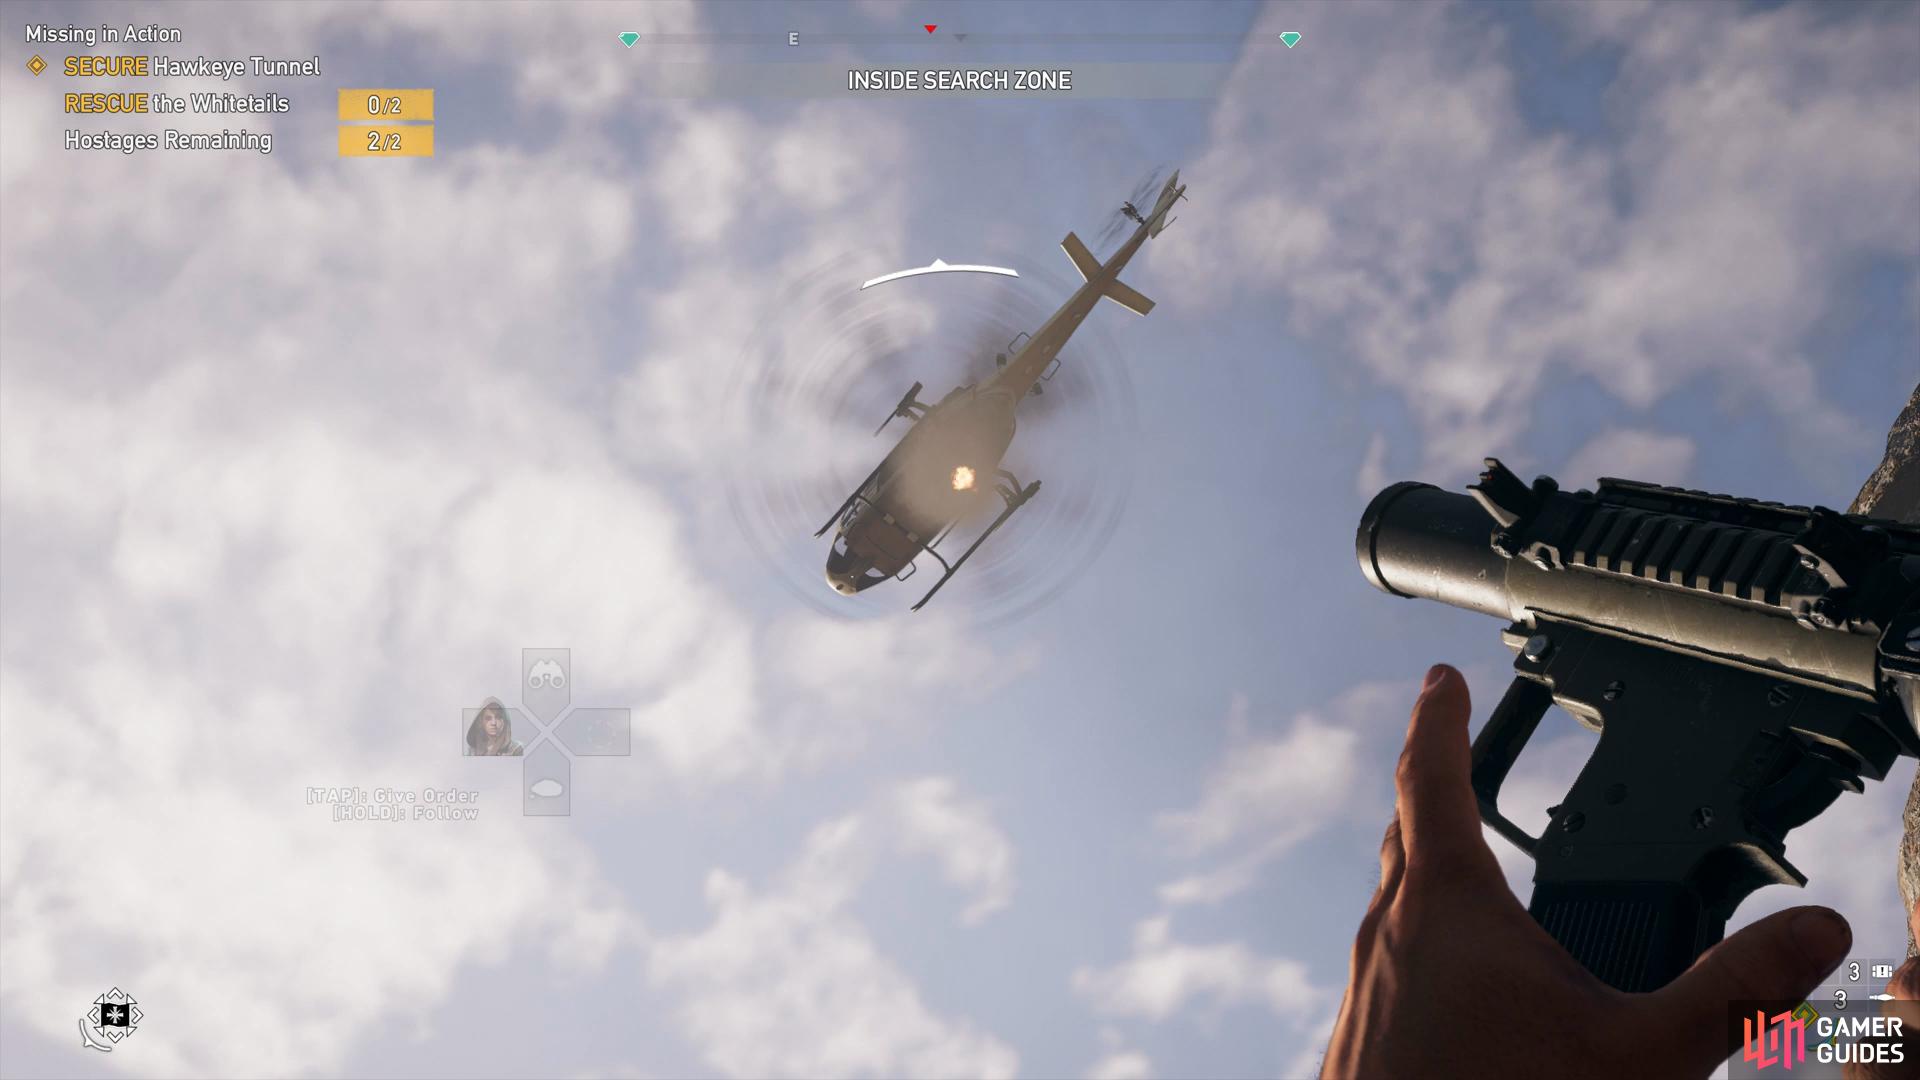 destroy the helicopter as quickly as possible.